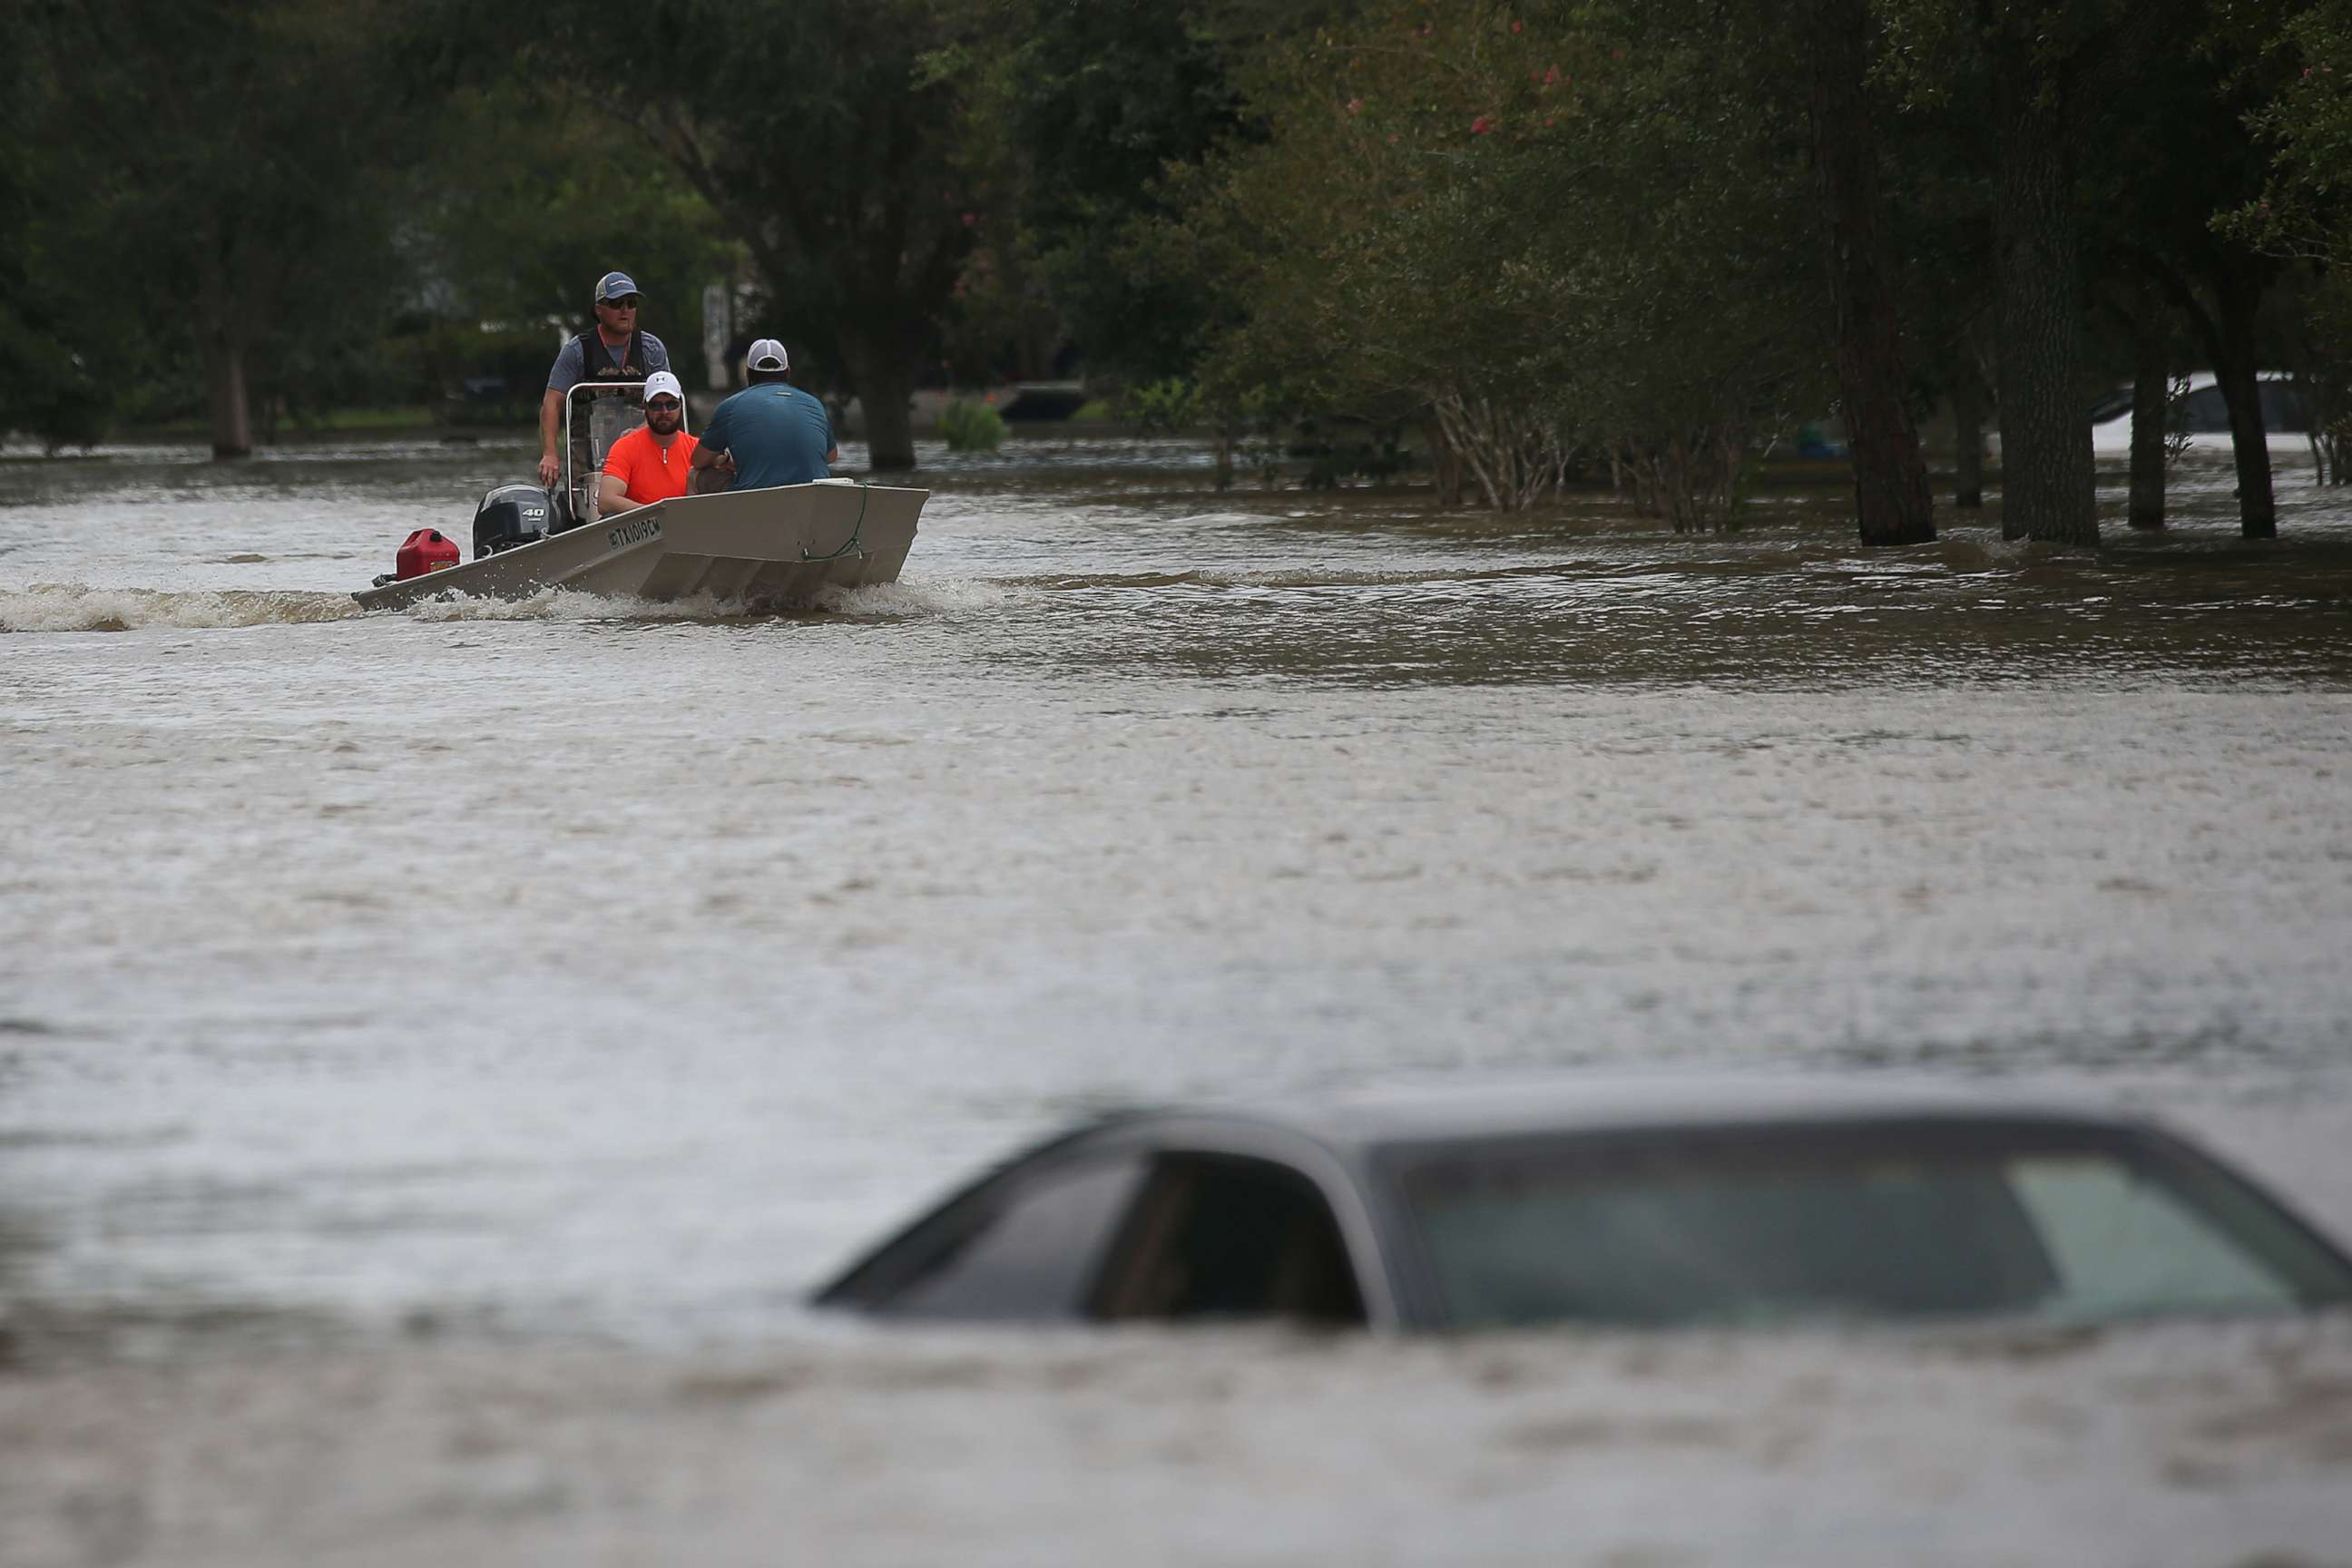 PHOTO: A rescue boat evacuates people from the rising waters of Buffalo Bayou following Hurricane Harvey in a neighborhood west of Houston, Texas, August 30, 2017.